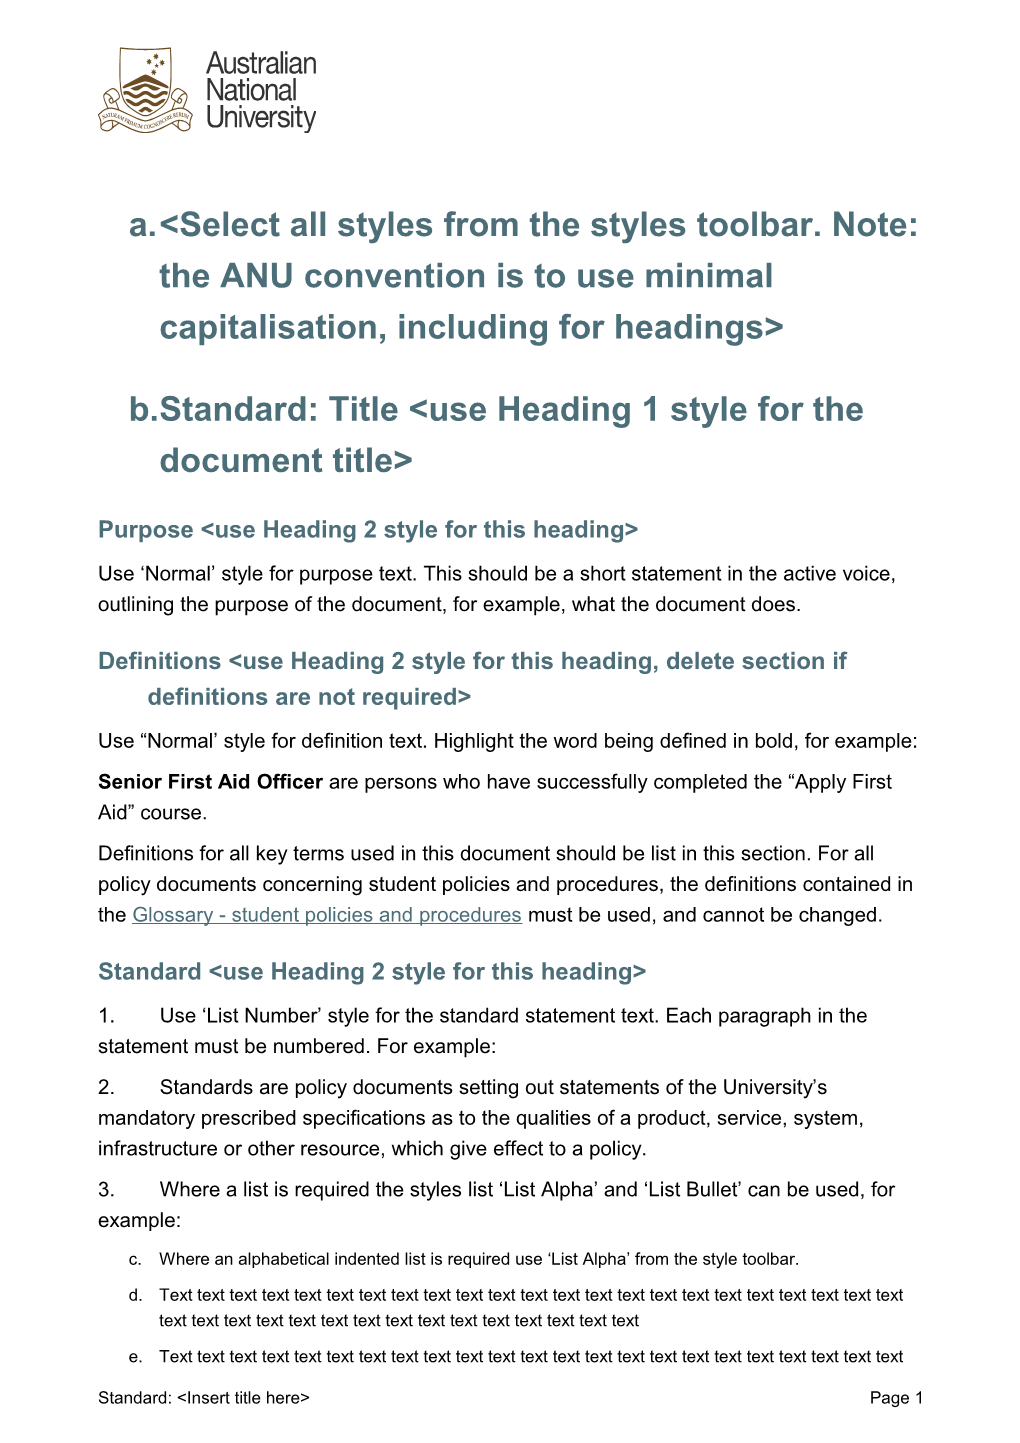 Standard:Title Use Heading 1 Style for the Document Title&gt;